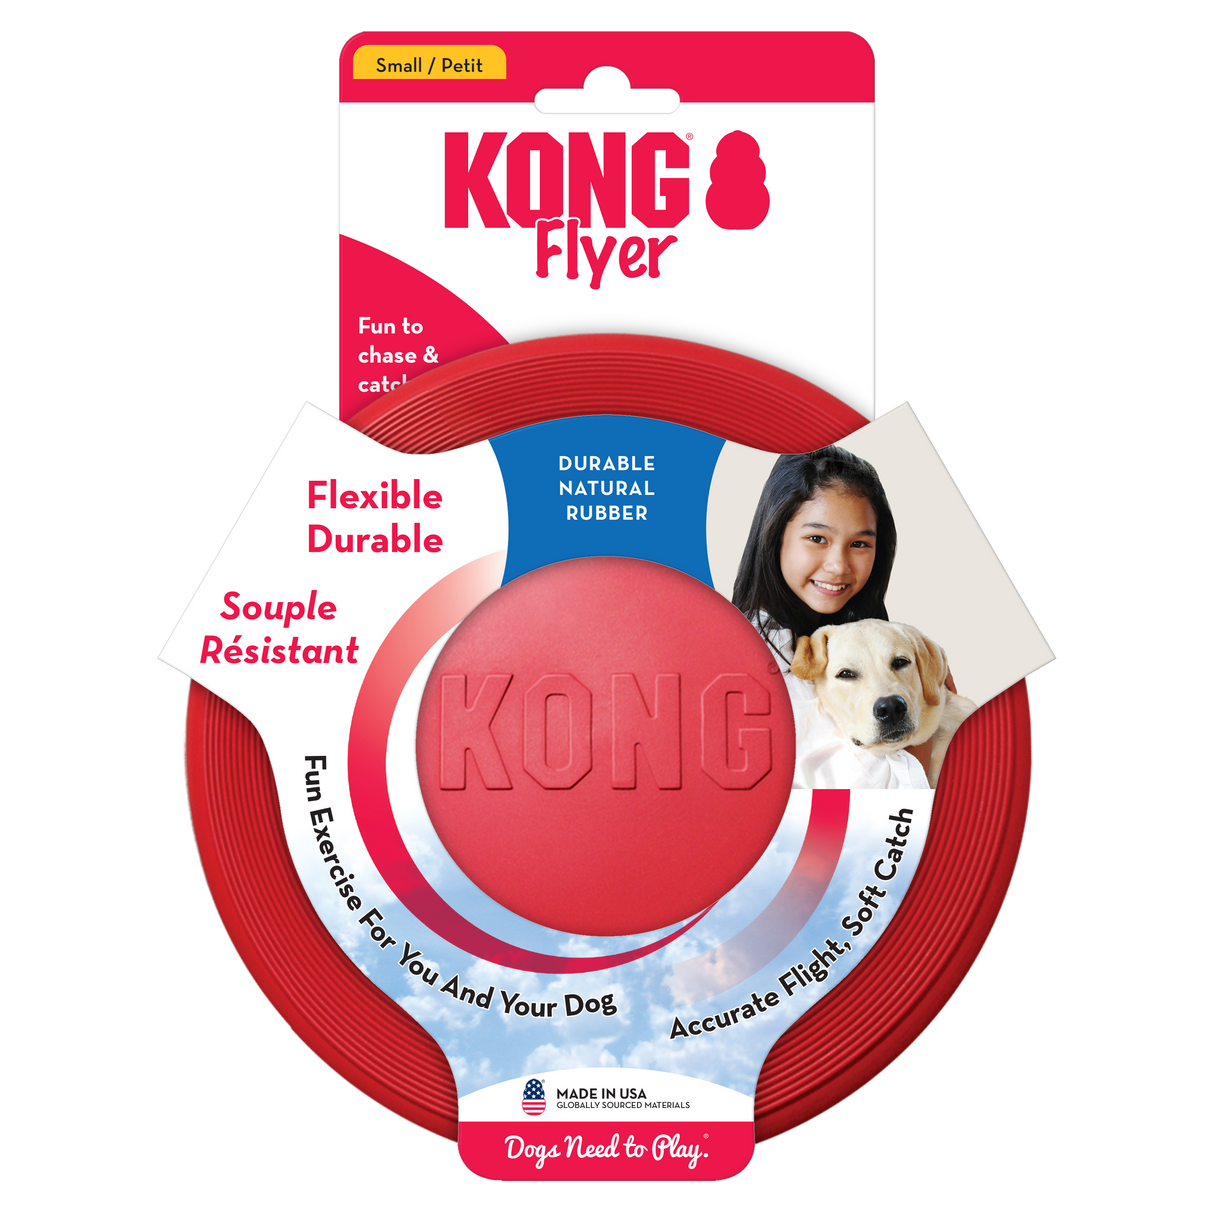 KONG Flyer #size_s